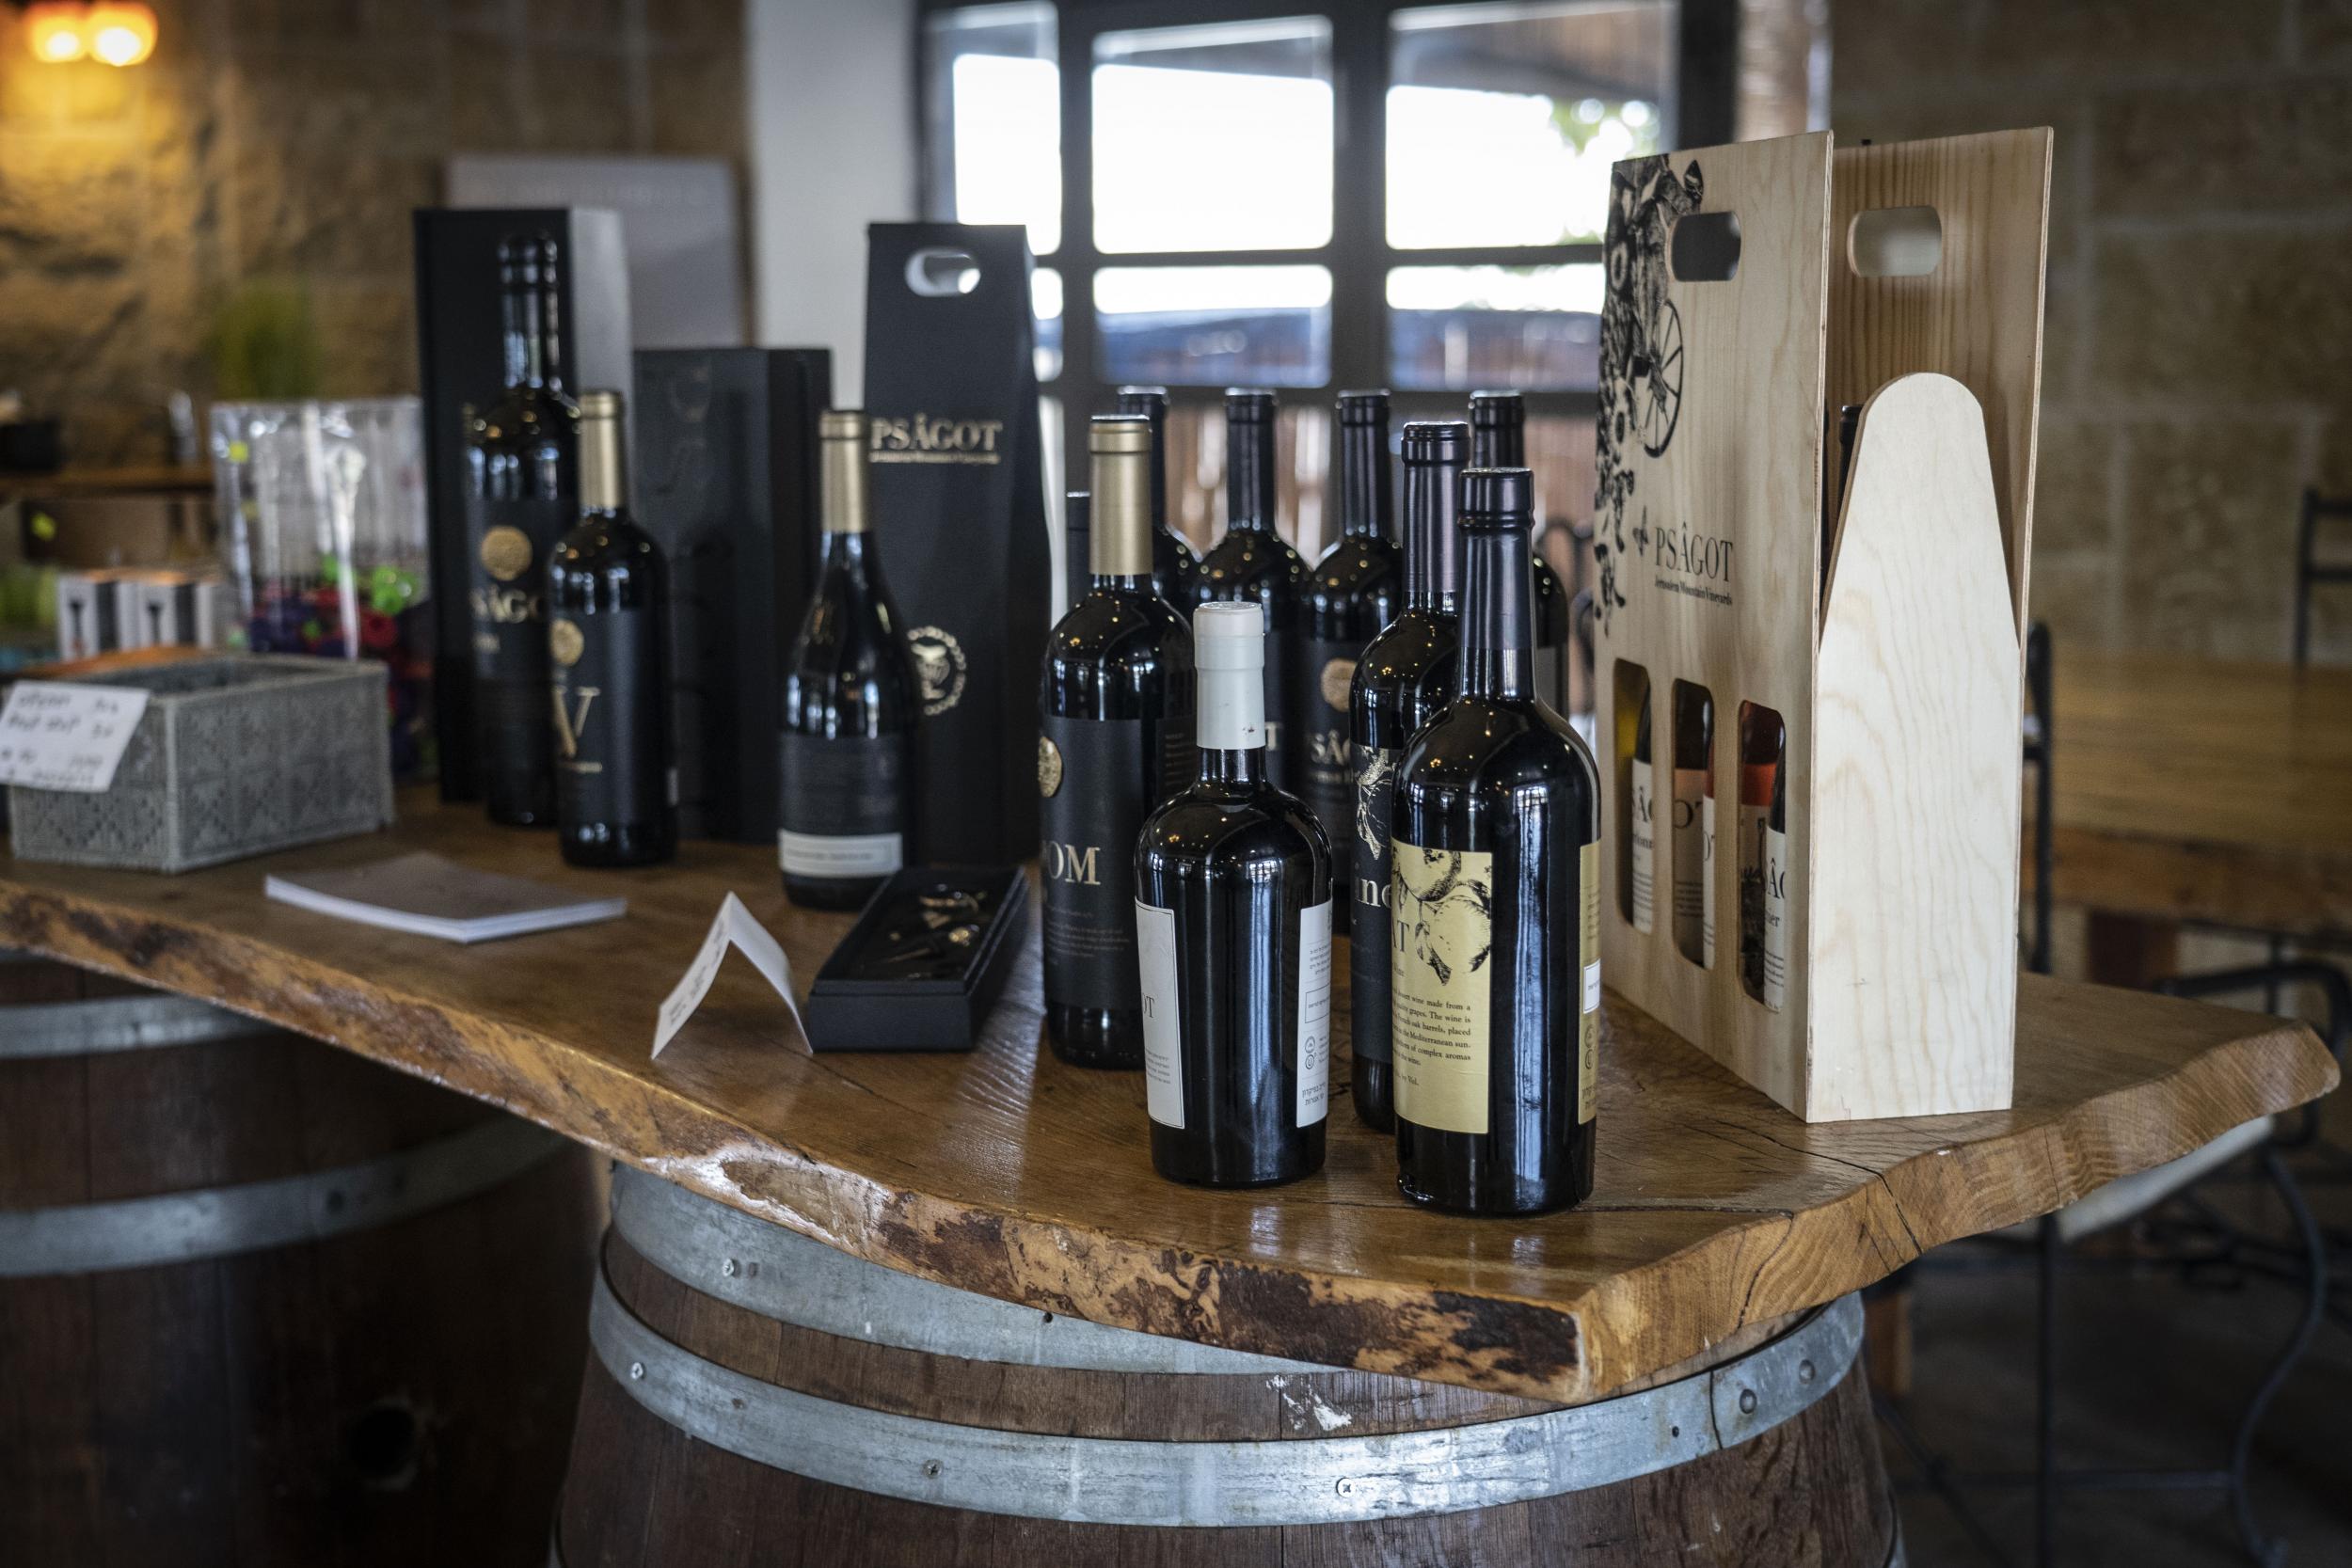 Psagot wines on display at the winery which hosts tours for visitors to the settlement